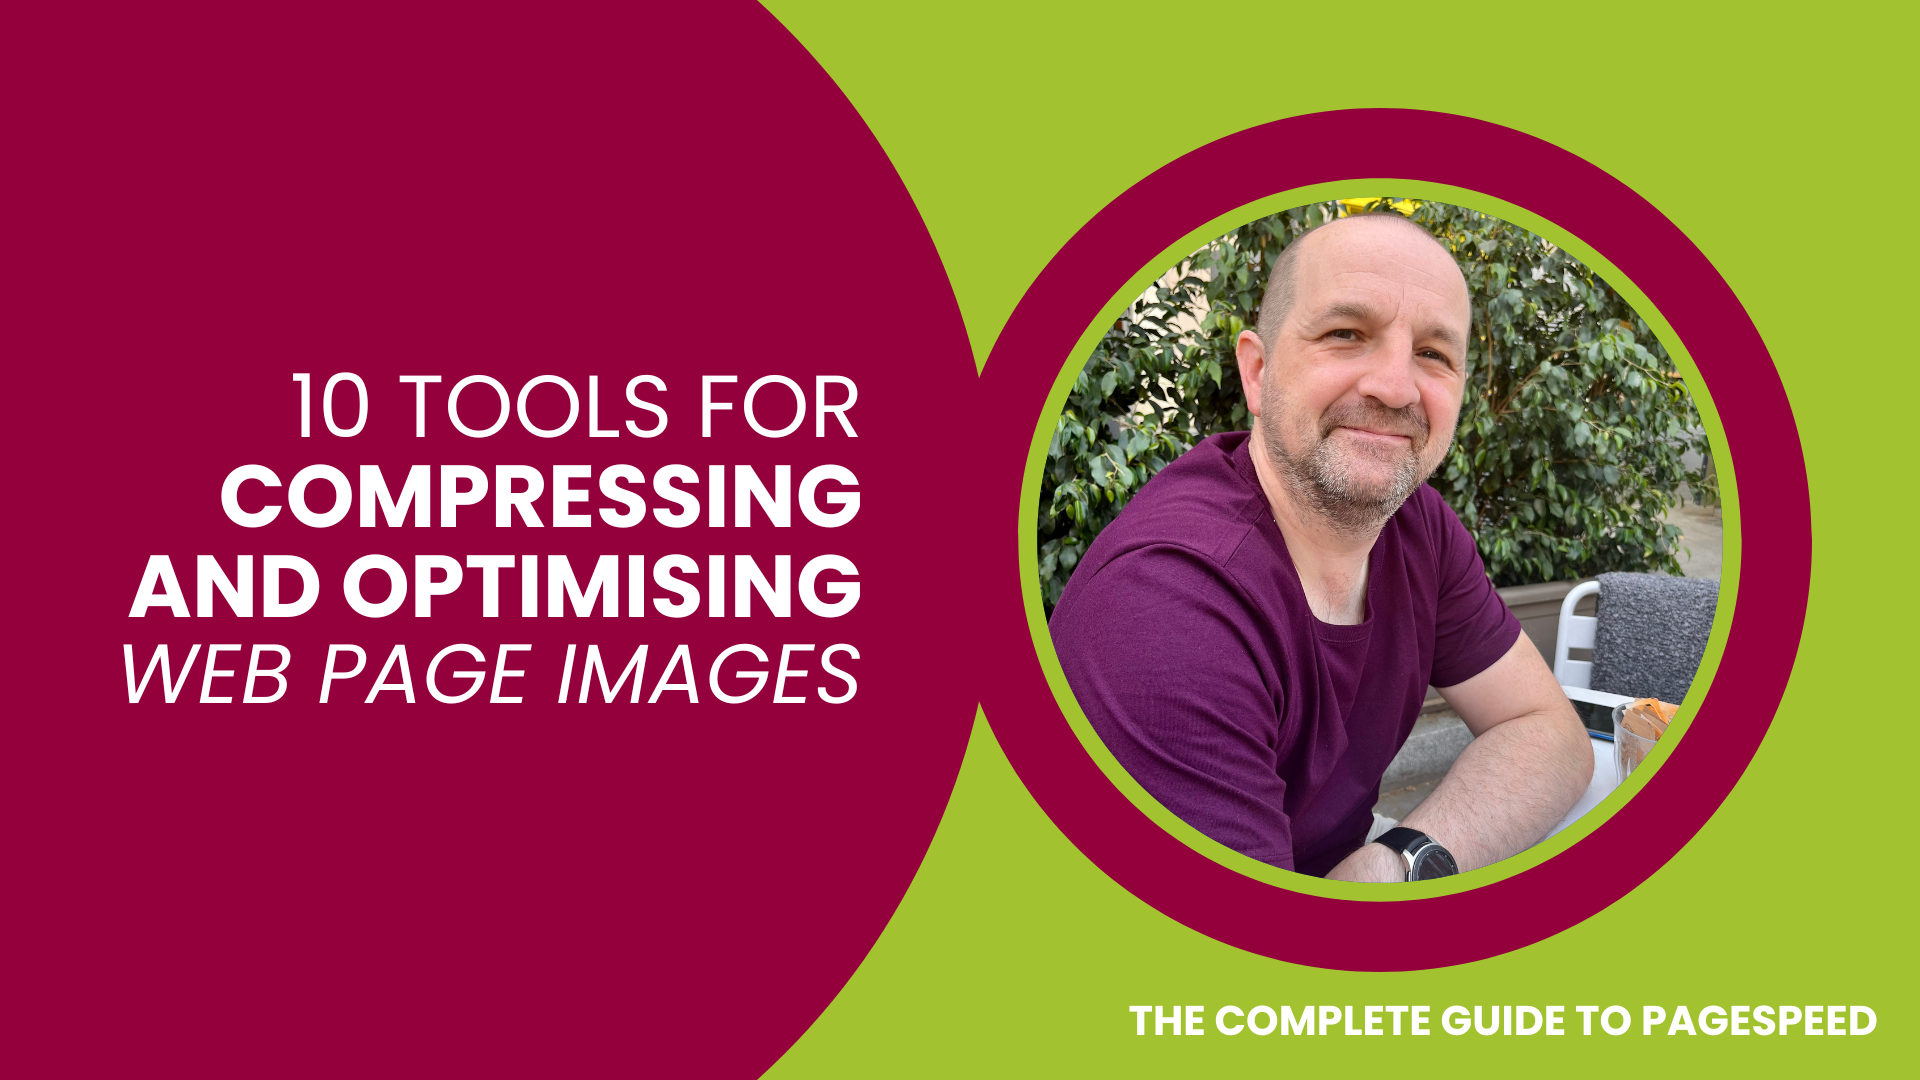 10 Tools for Compressing and Optimising Web Page Images